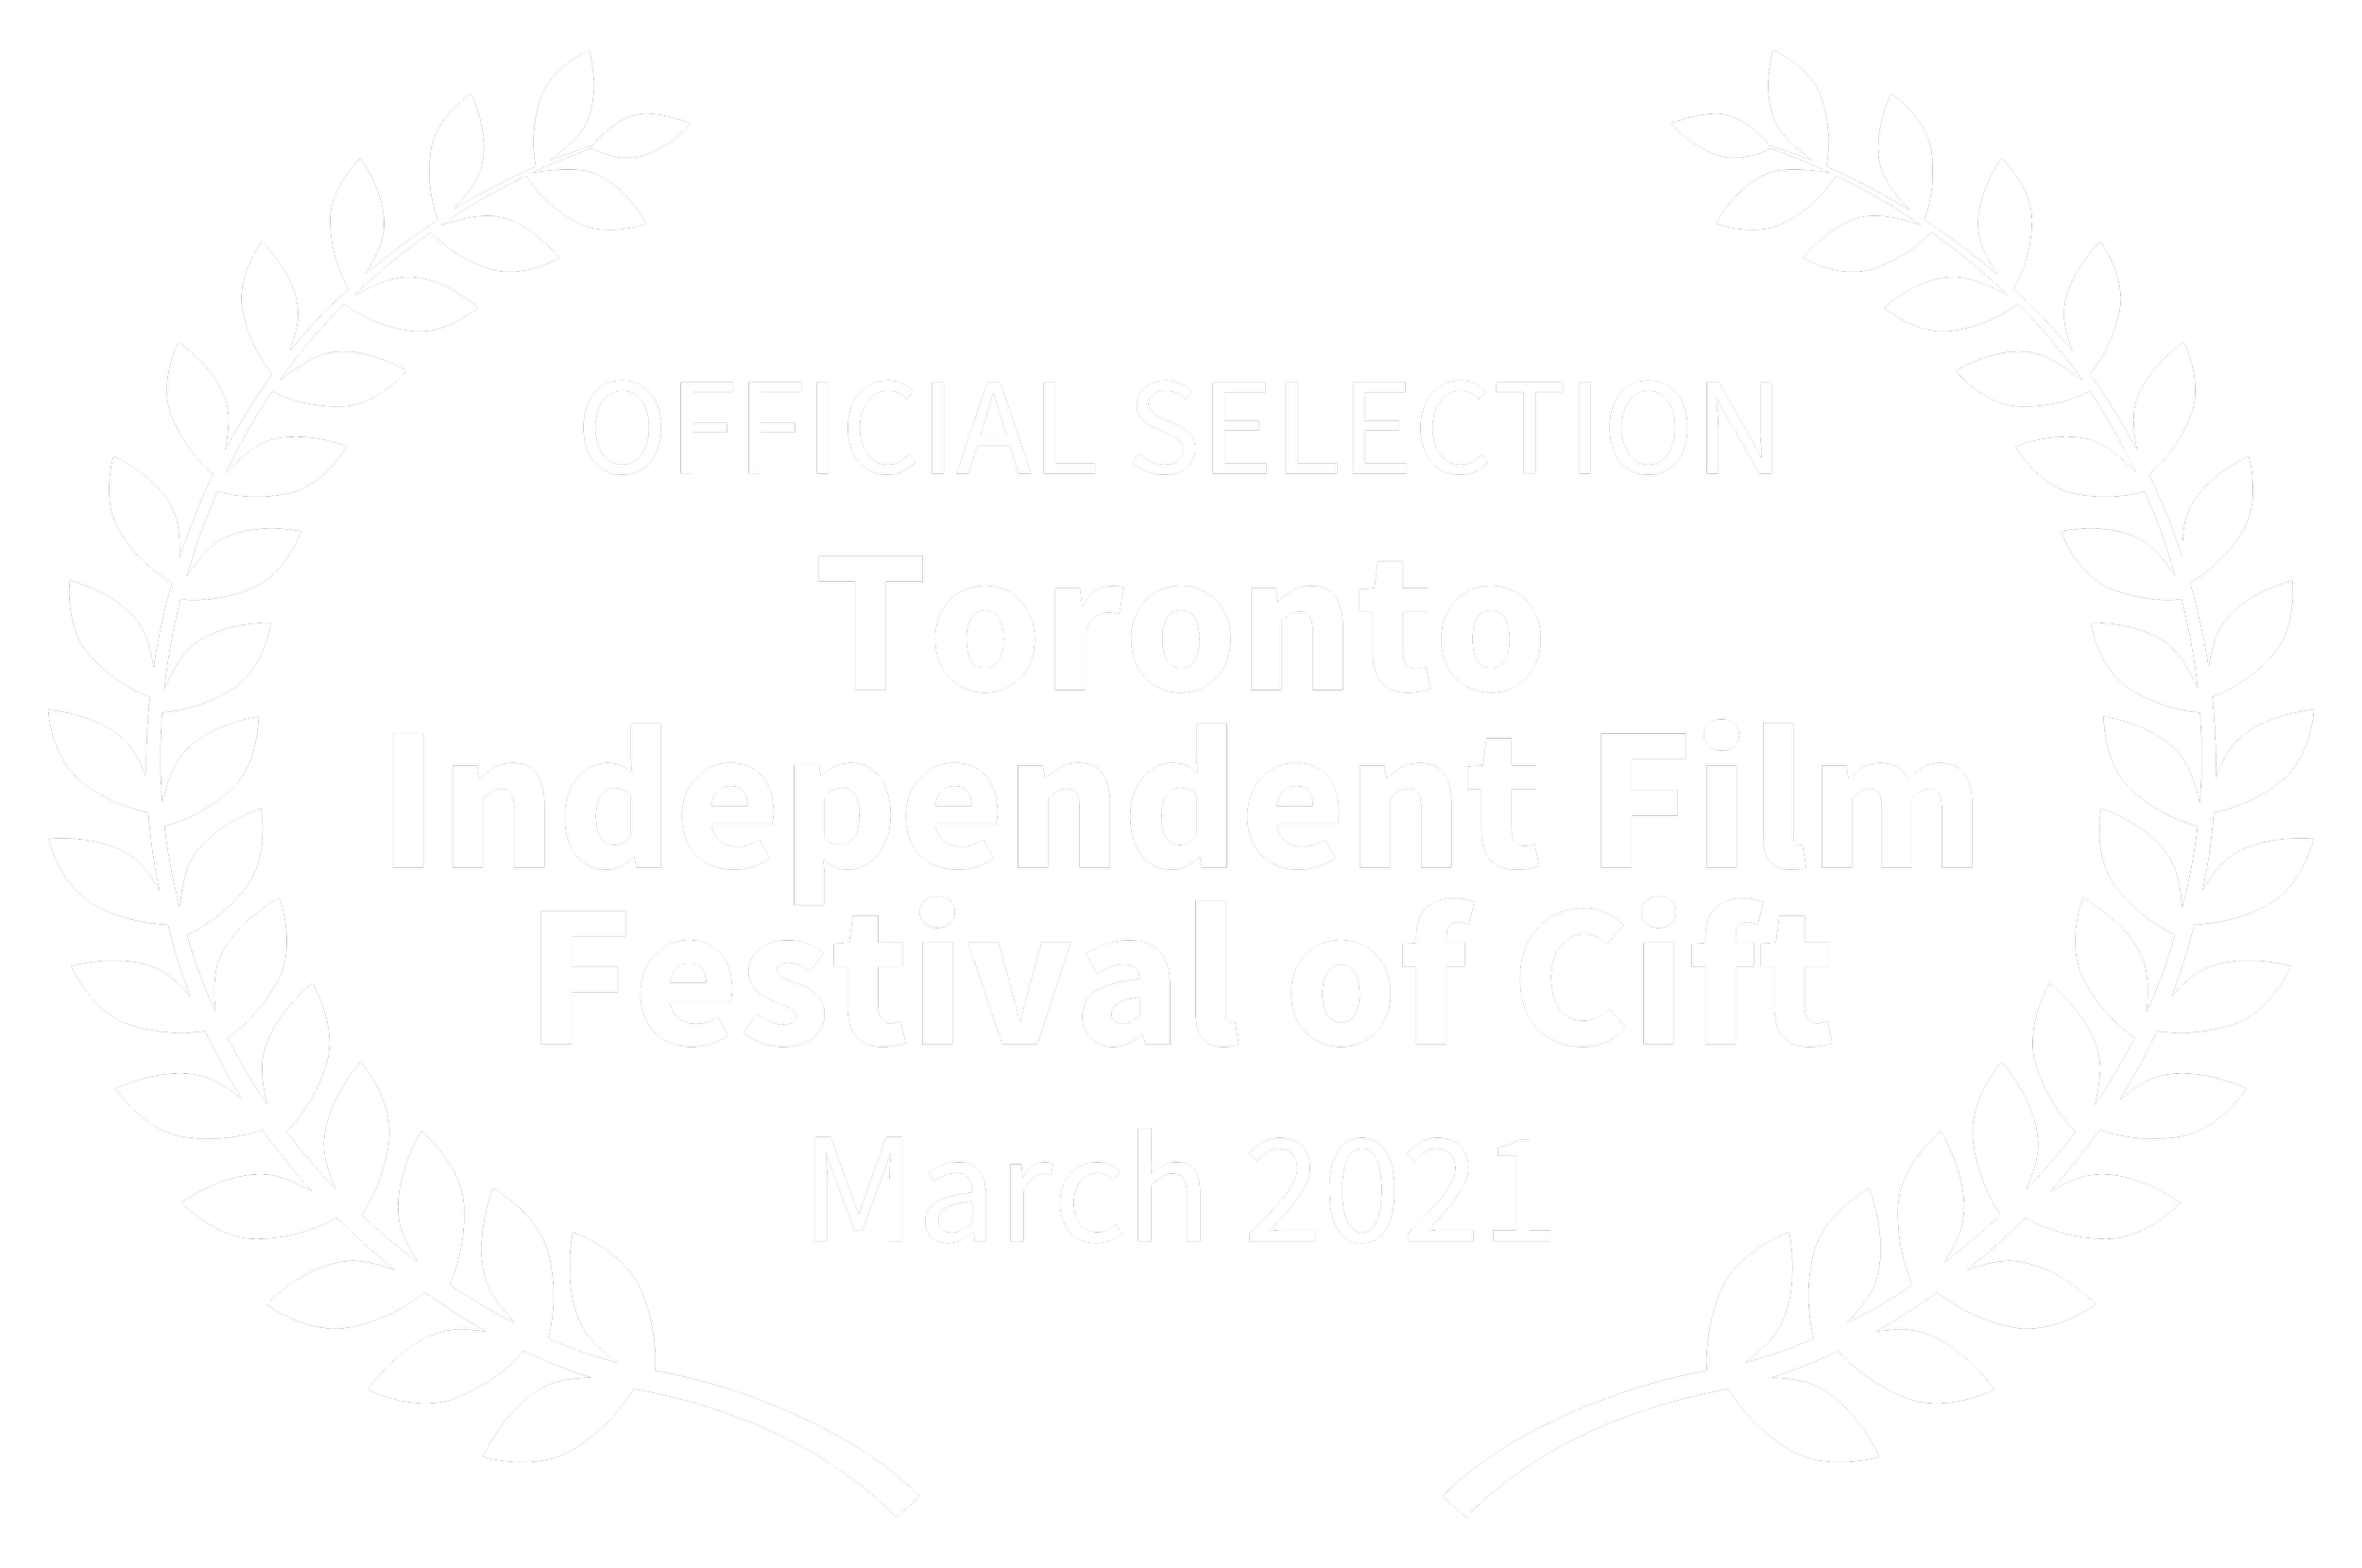 TorontoIndependentFilmFestivalofCift-March2021.png